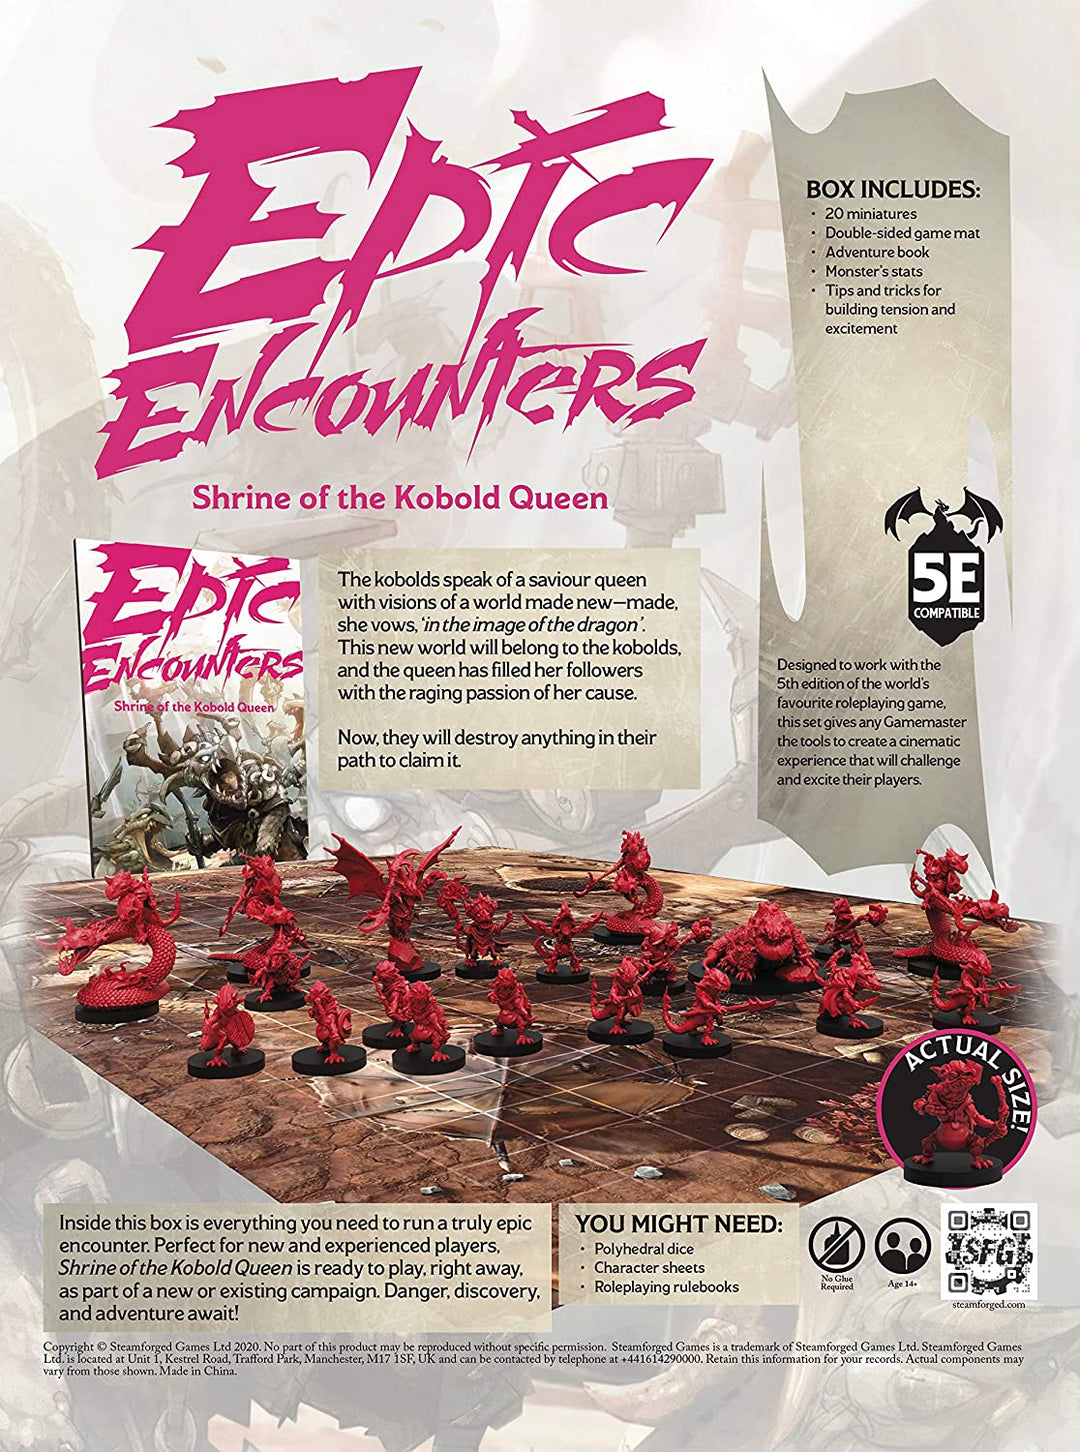 Epic Encounters: Shrine of the Kobold Queen - RPG Fantasy Roleplaying Tabletop Game with 20 Miniatures, Double-Sided Game Mat, & Game Master Adventure Book with Monster Stats, 5E Compatible